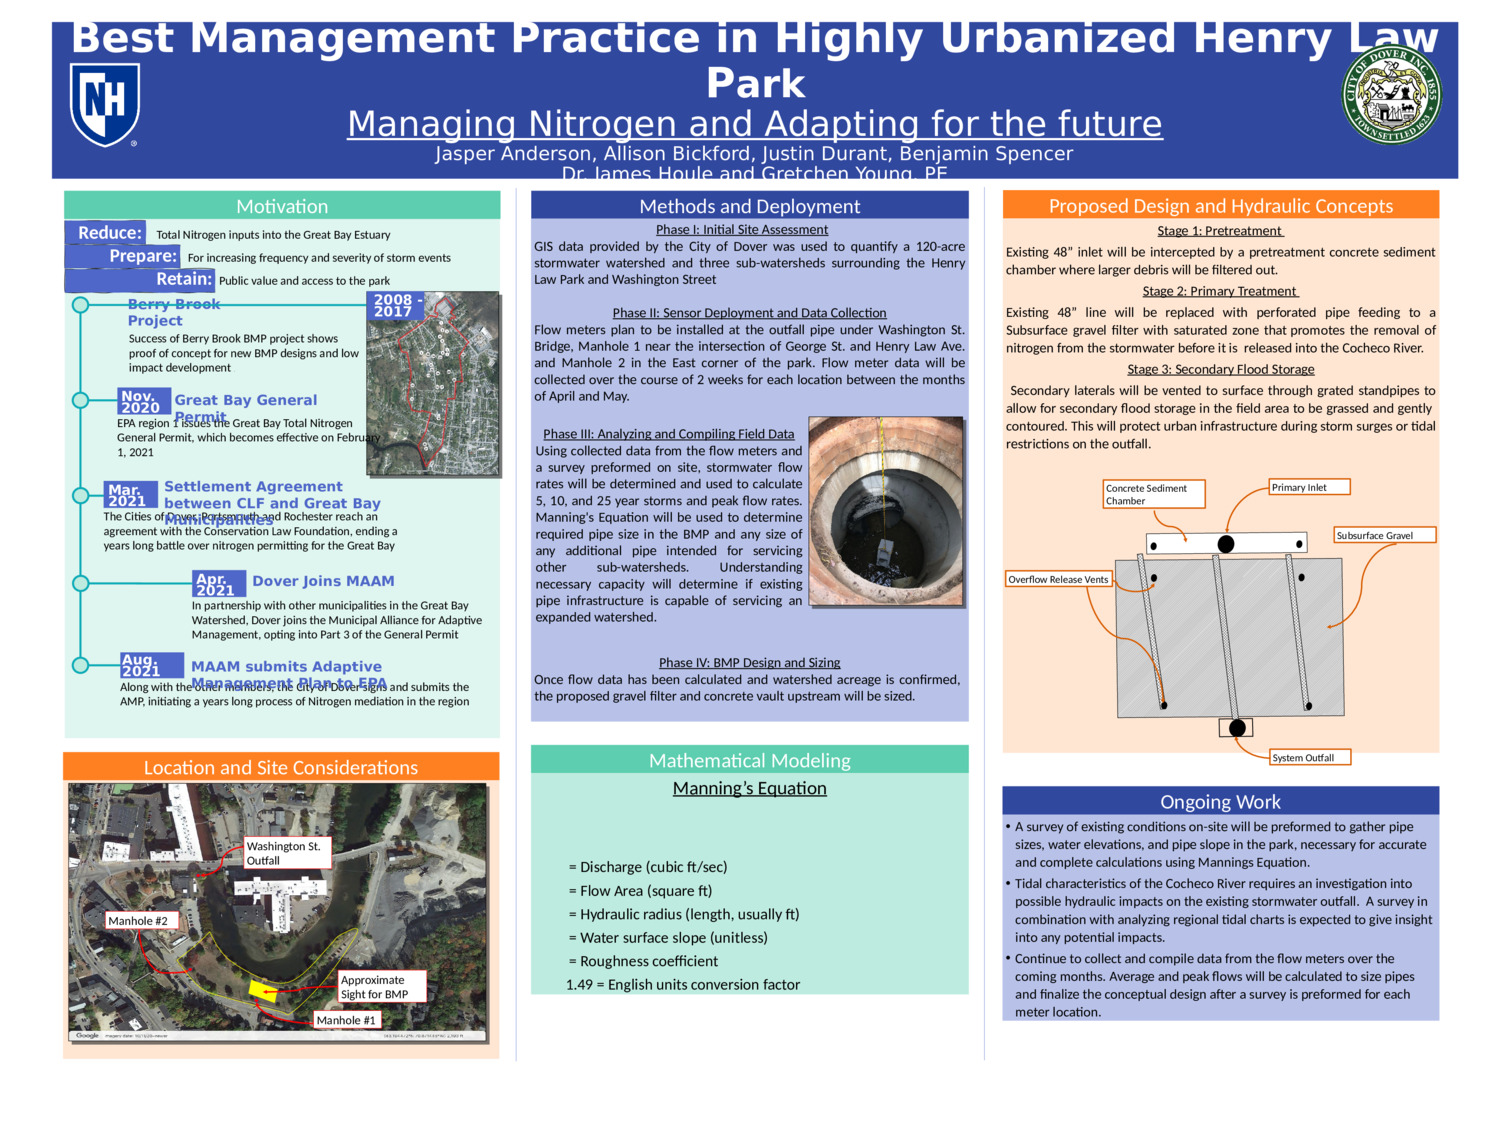 Best Management Practice In Highly Urbanized Henry Law Park by ab1424